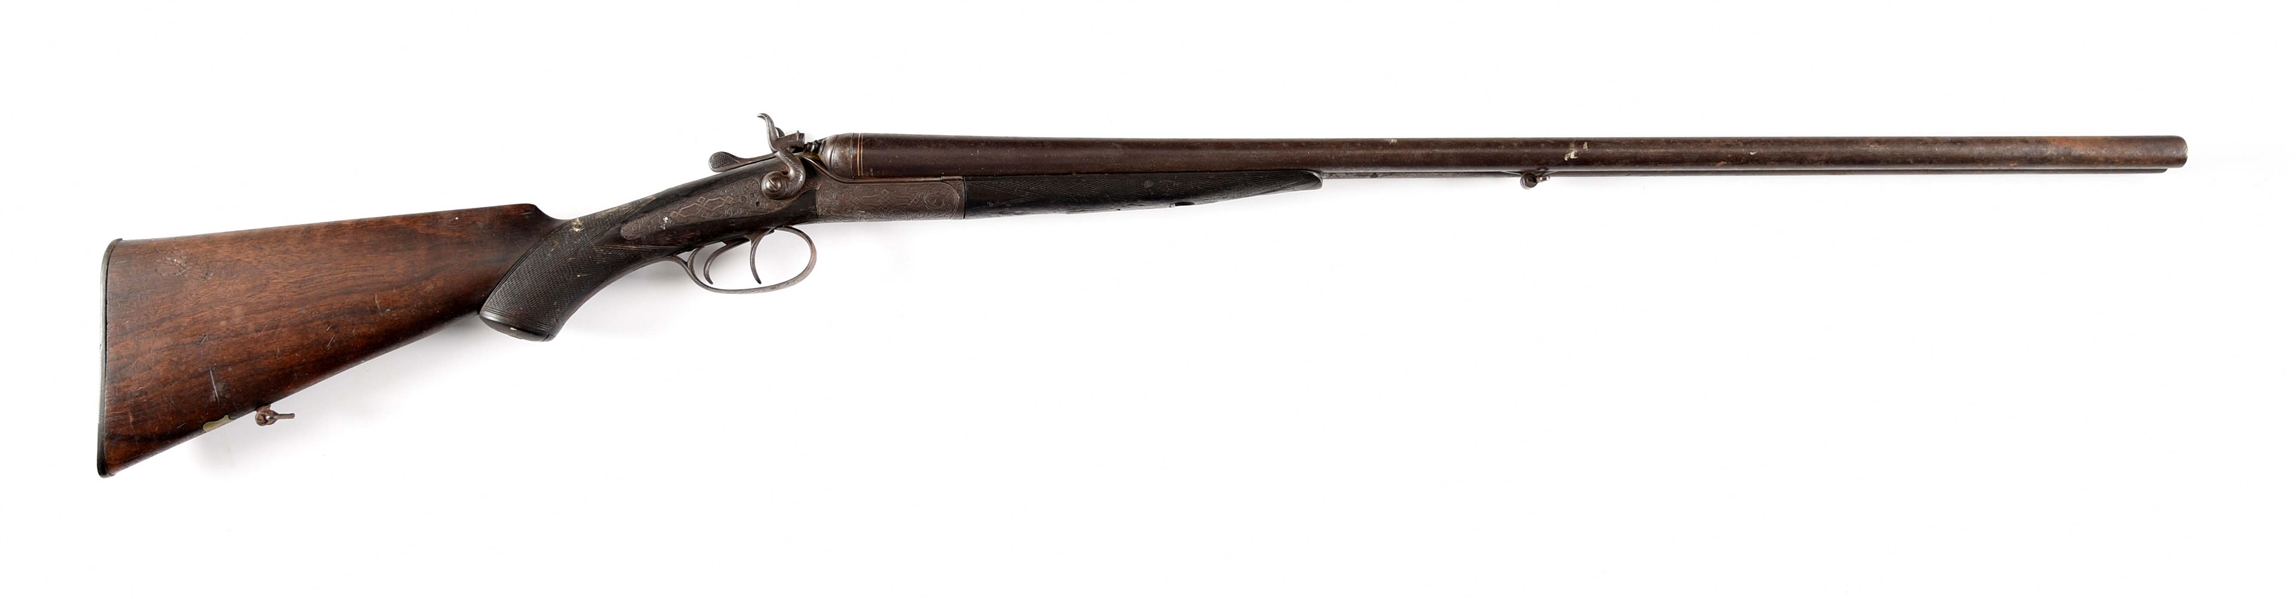 (A) BELGIAN SIDE BY SIDE PERCUSSION HAMMER SHOTGUN